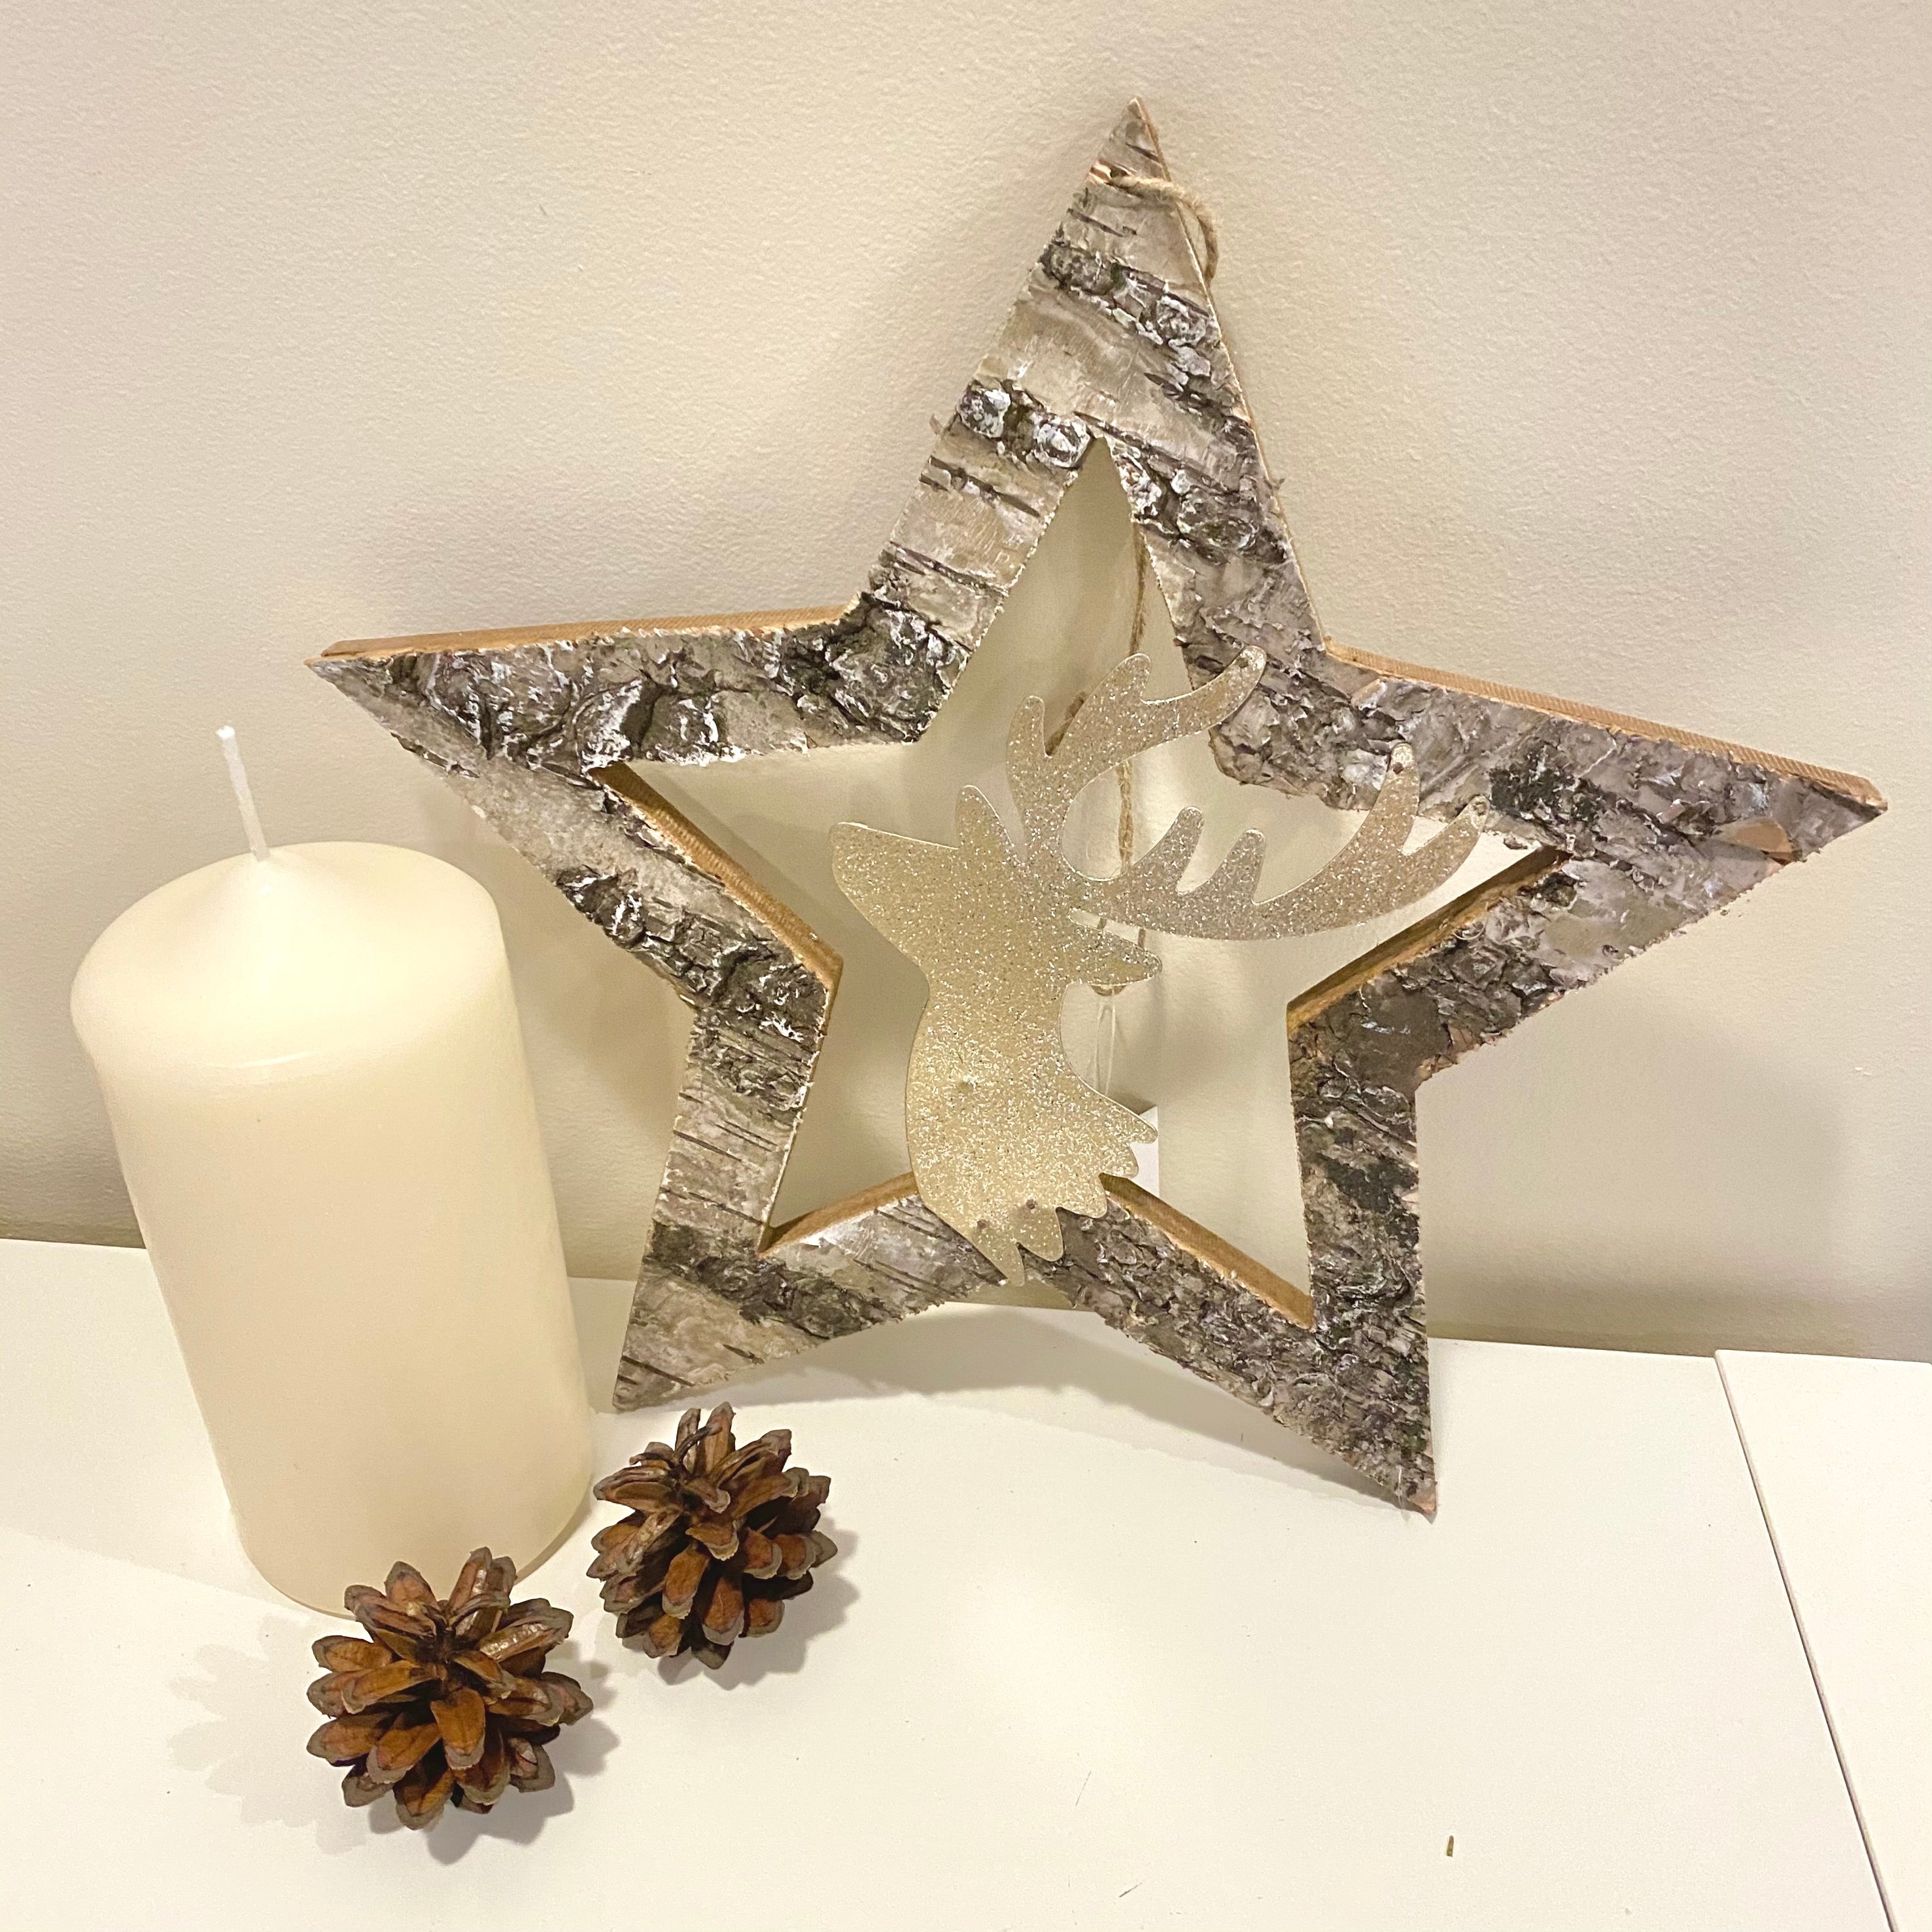 Wooden Star with Glittery Deer Silhouette